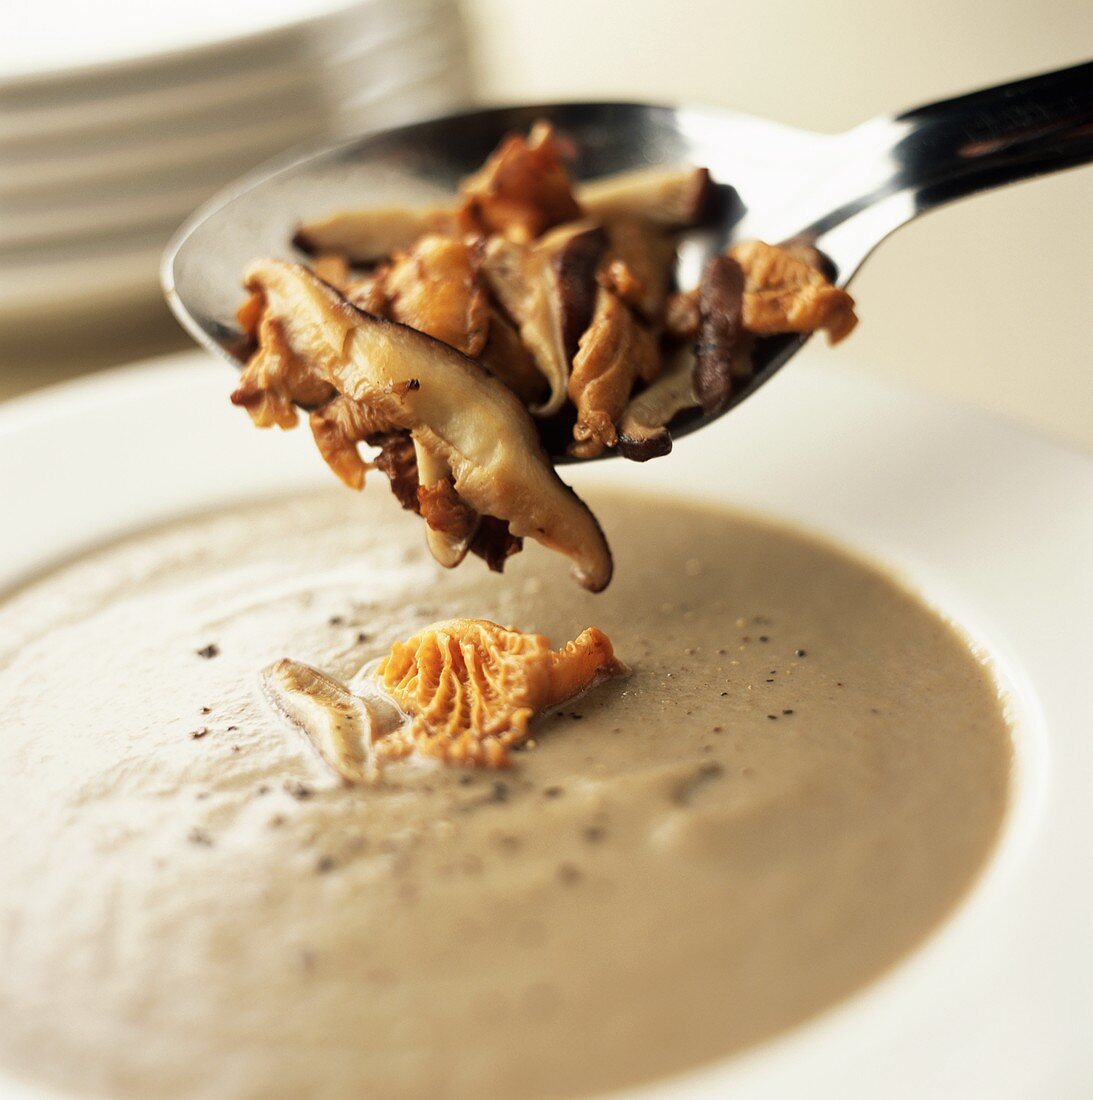 Putting a spoonful of mushrooms into mushroom soup